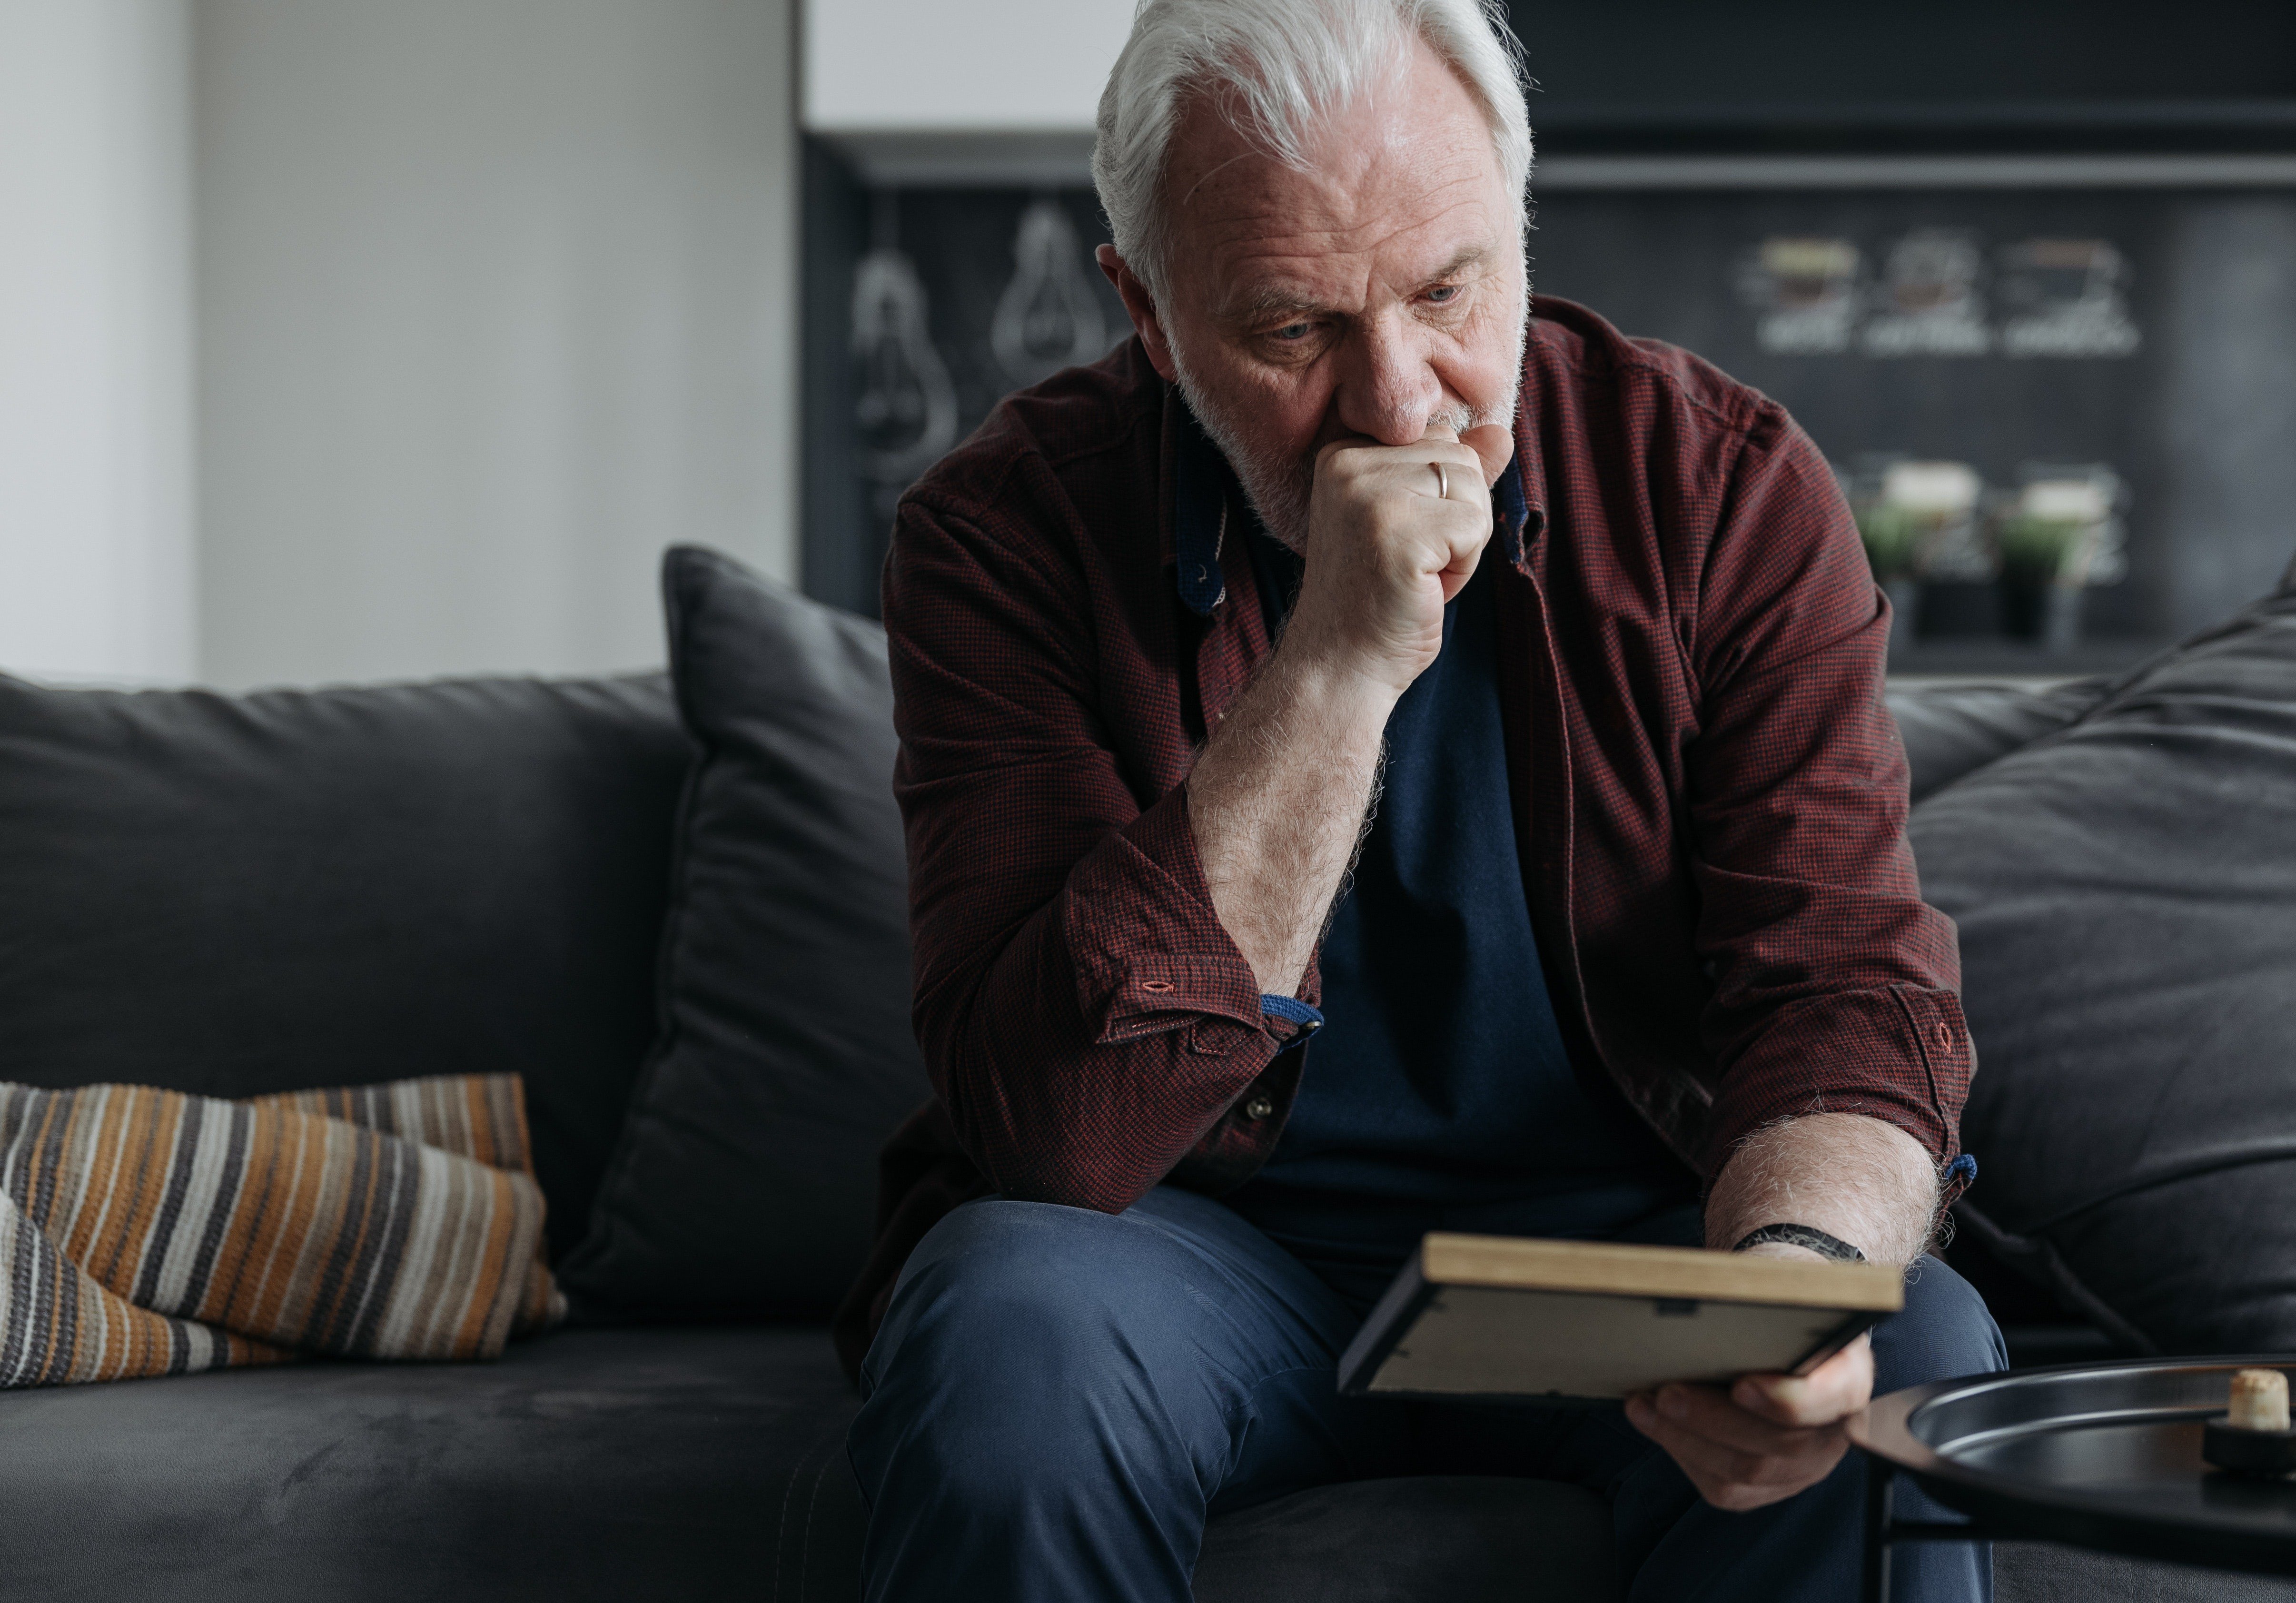 Dylan caught his grandpa shedding tears at a picture of a woman who was not his late wife. | Source: Pexels